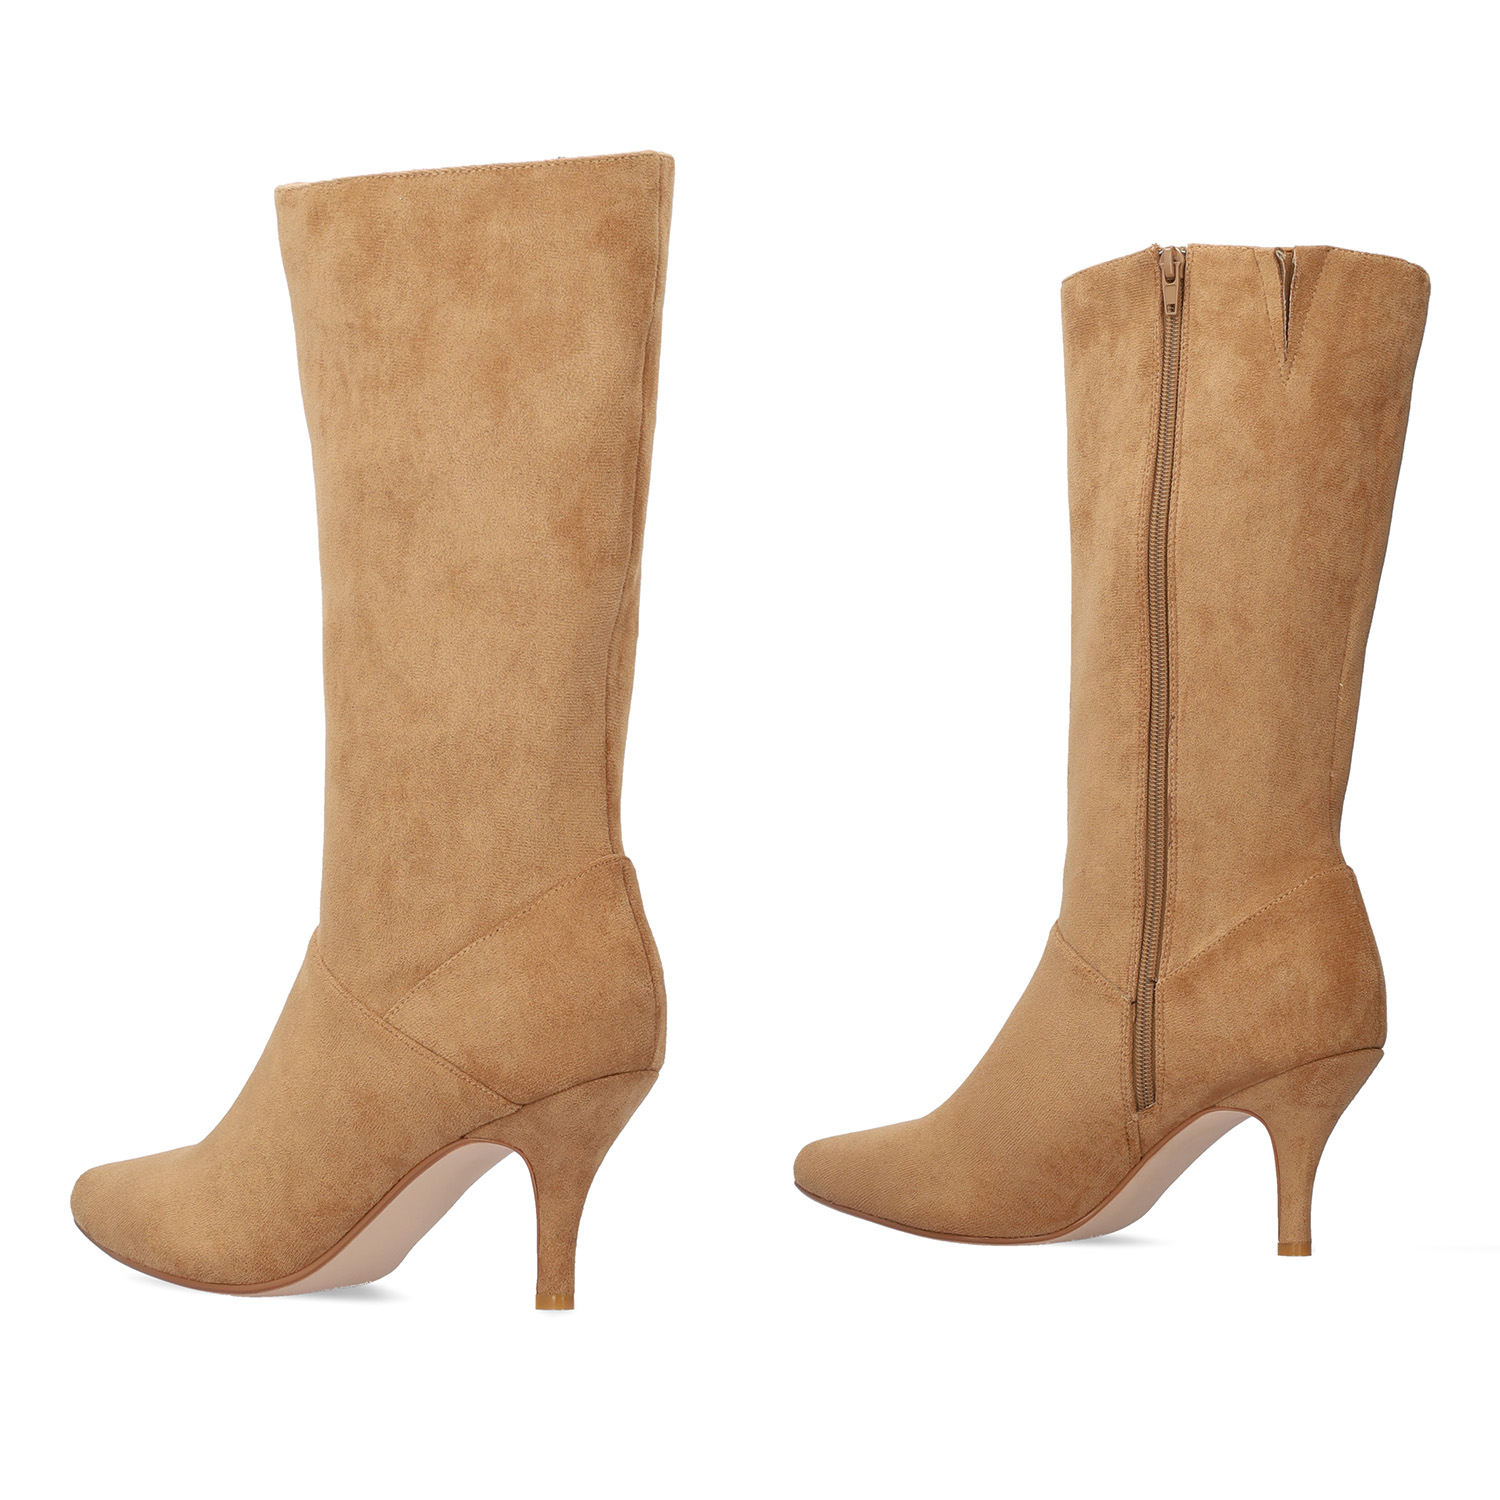 Heeled high boots in brown faux suede. 